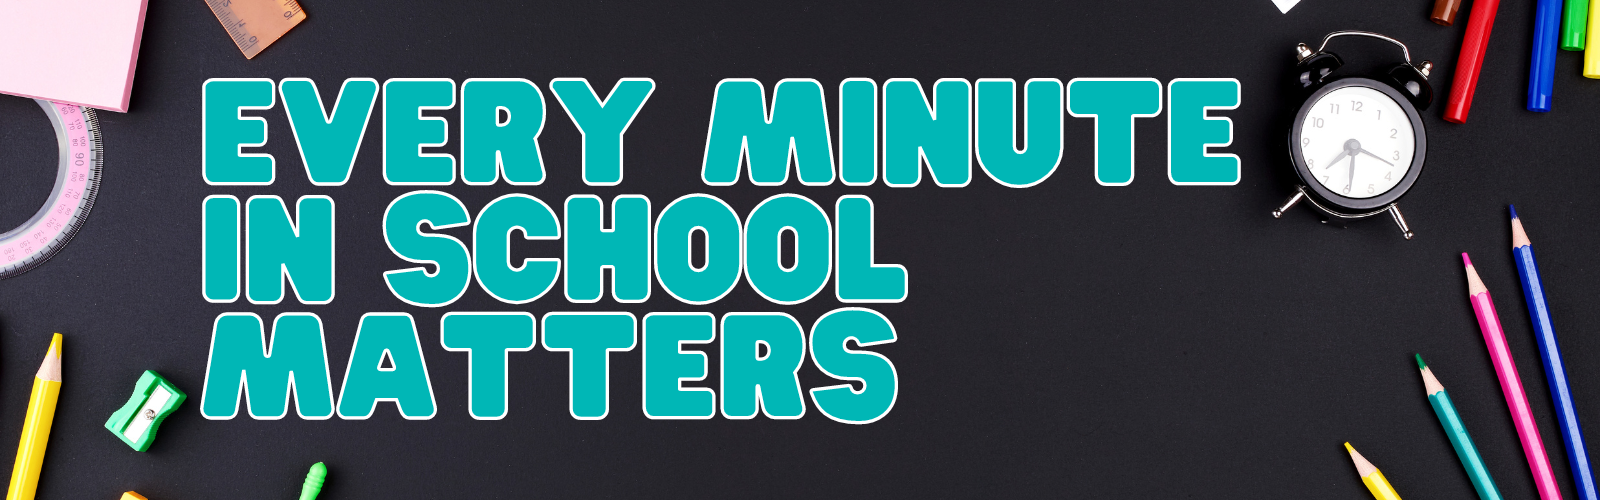 A background with school supplies with text that reads "Every minute in school matters"